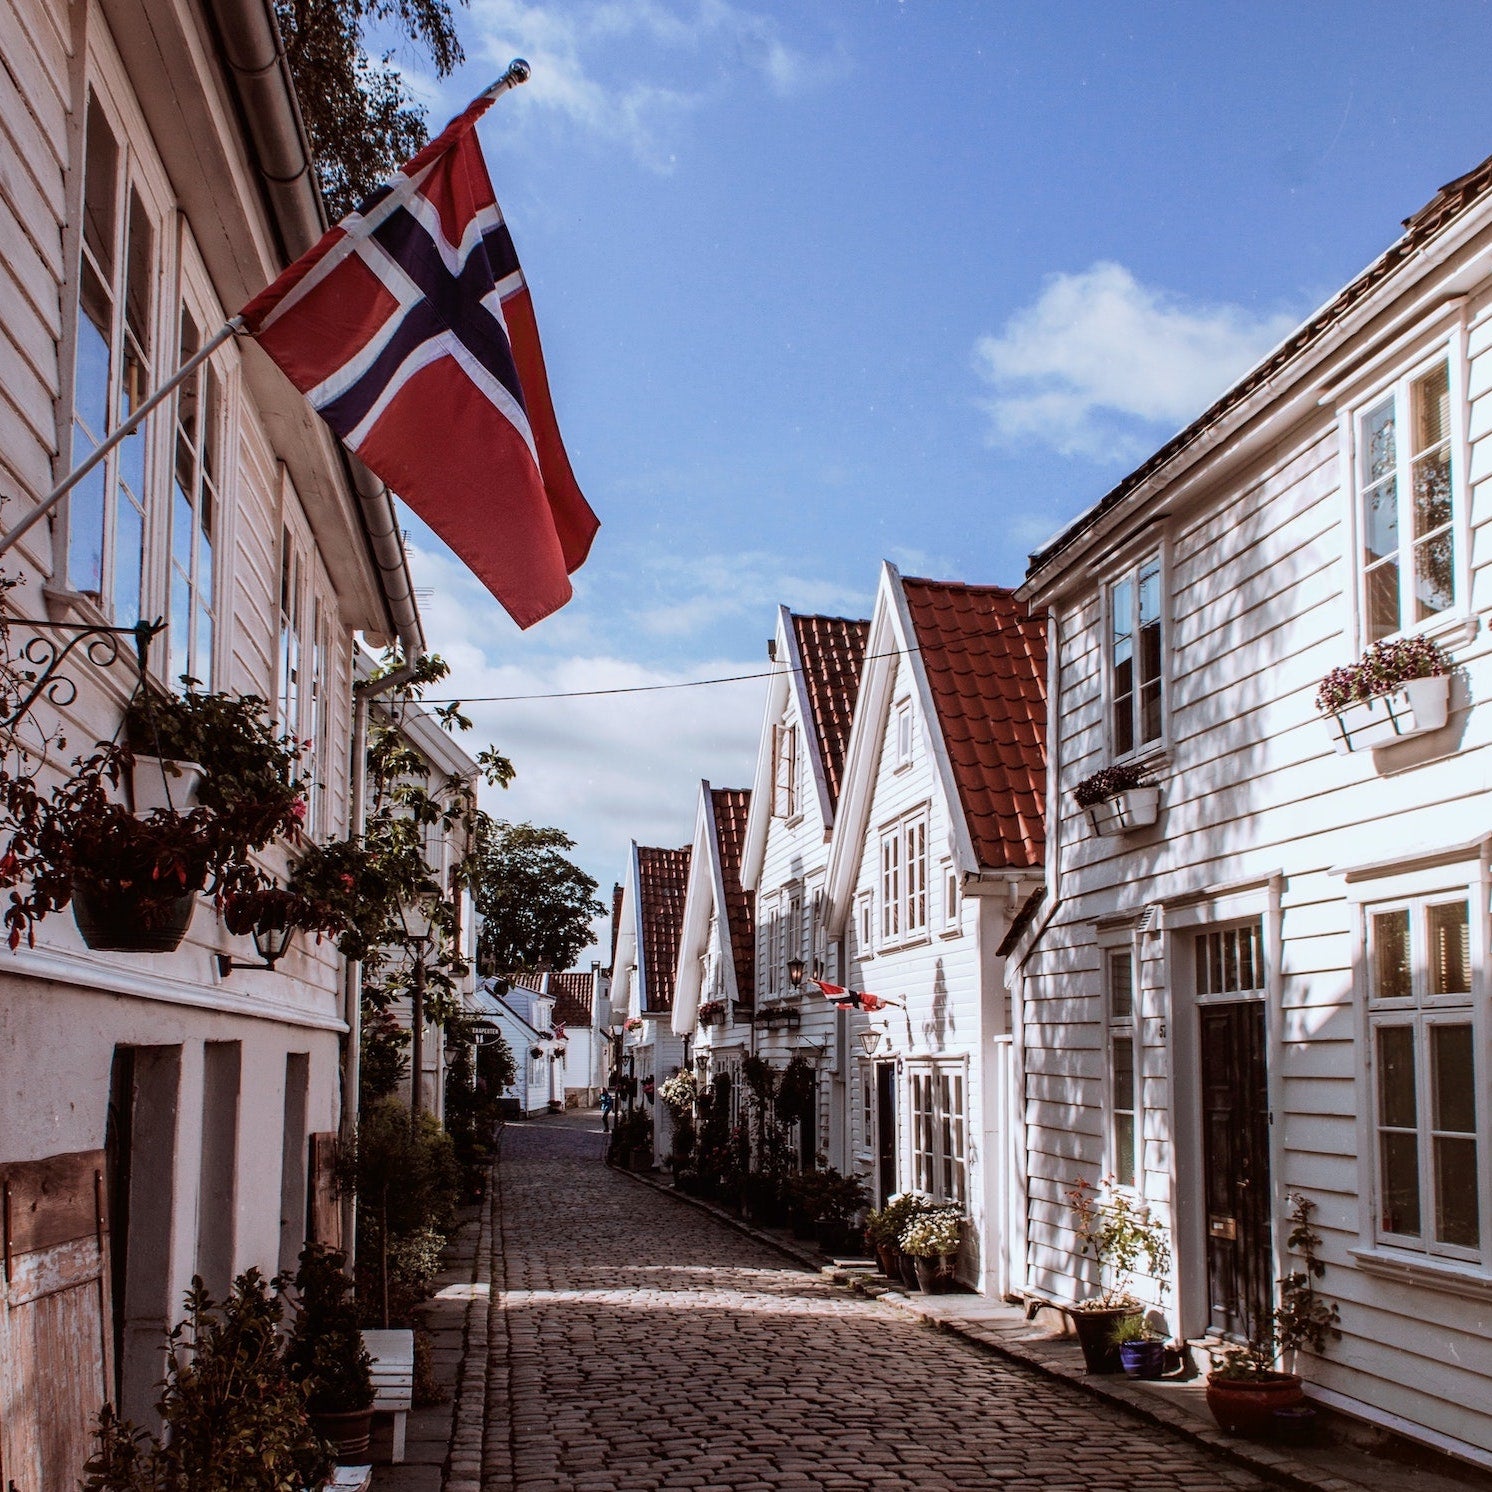 A quaint cobblestone street lined with traditional white wooden houses under a clear blue sky. A vibrant Norwegian flag waves proudly from one of the houses, adding a splash of red, blue, and white to the charming scene.